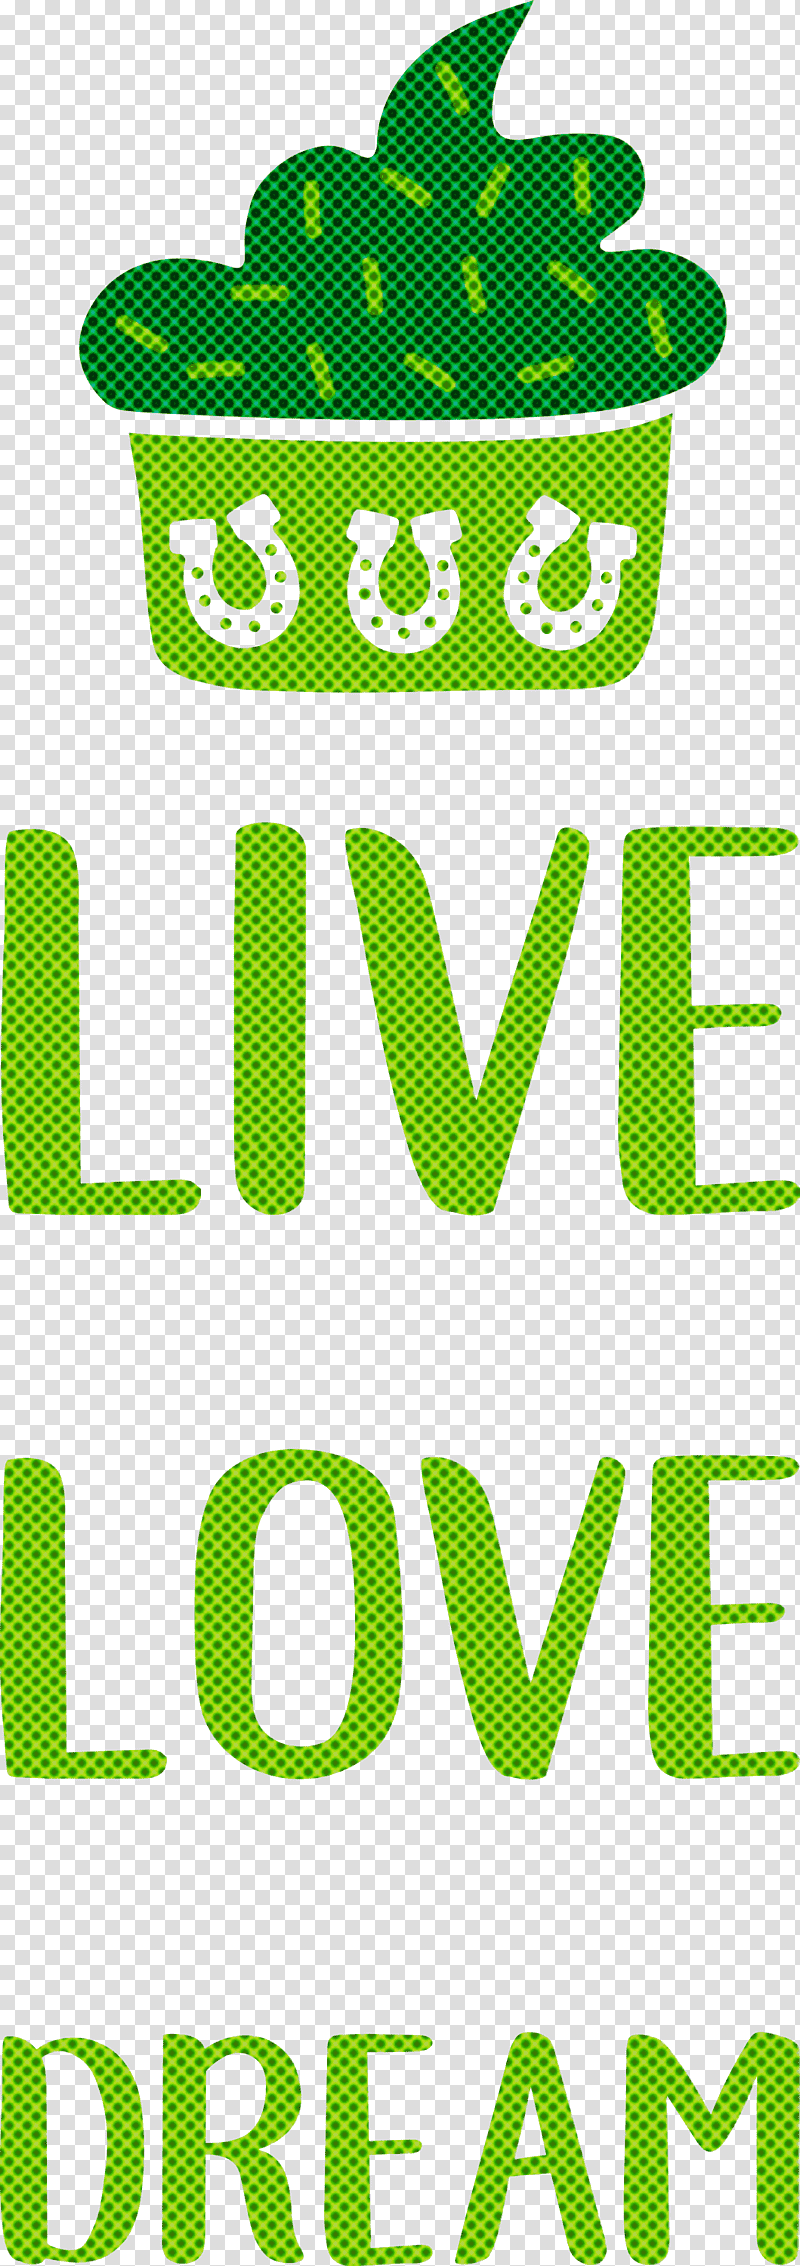 Live Love Dream, Computer, Logo, Typography, Game Controller transparent background PNG clipart